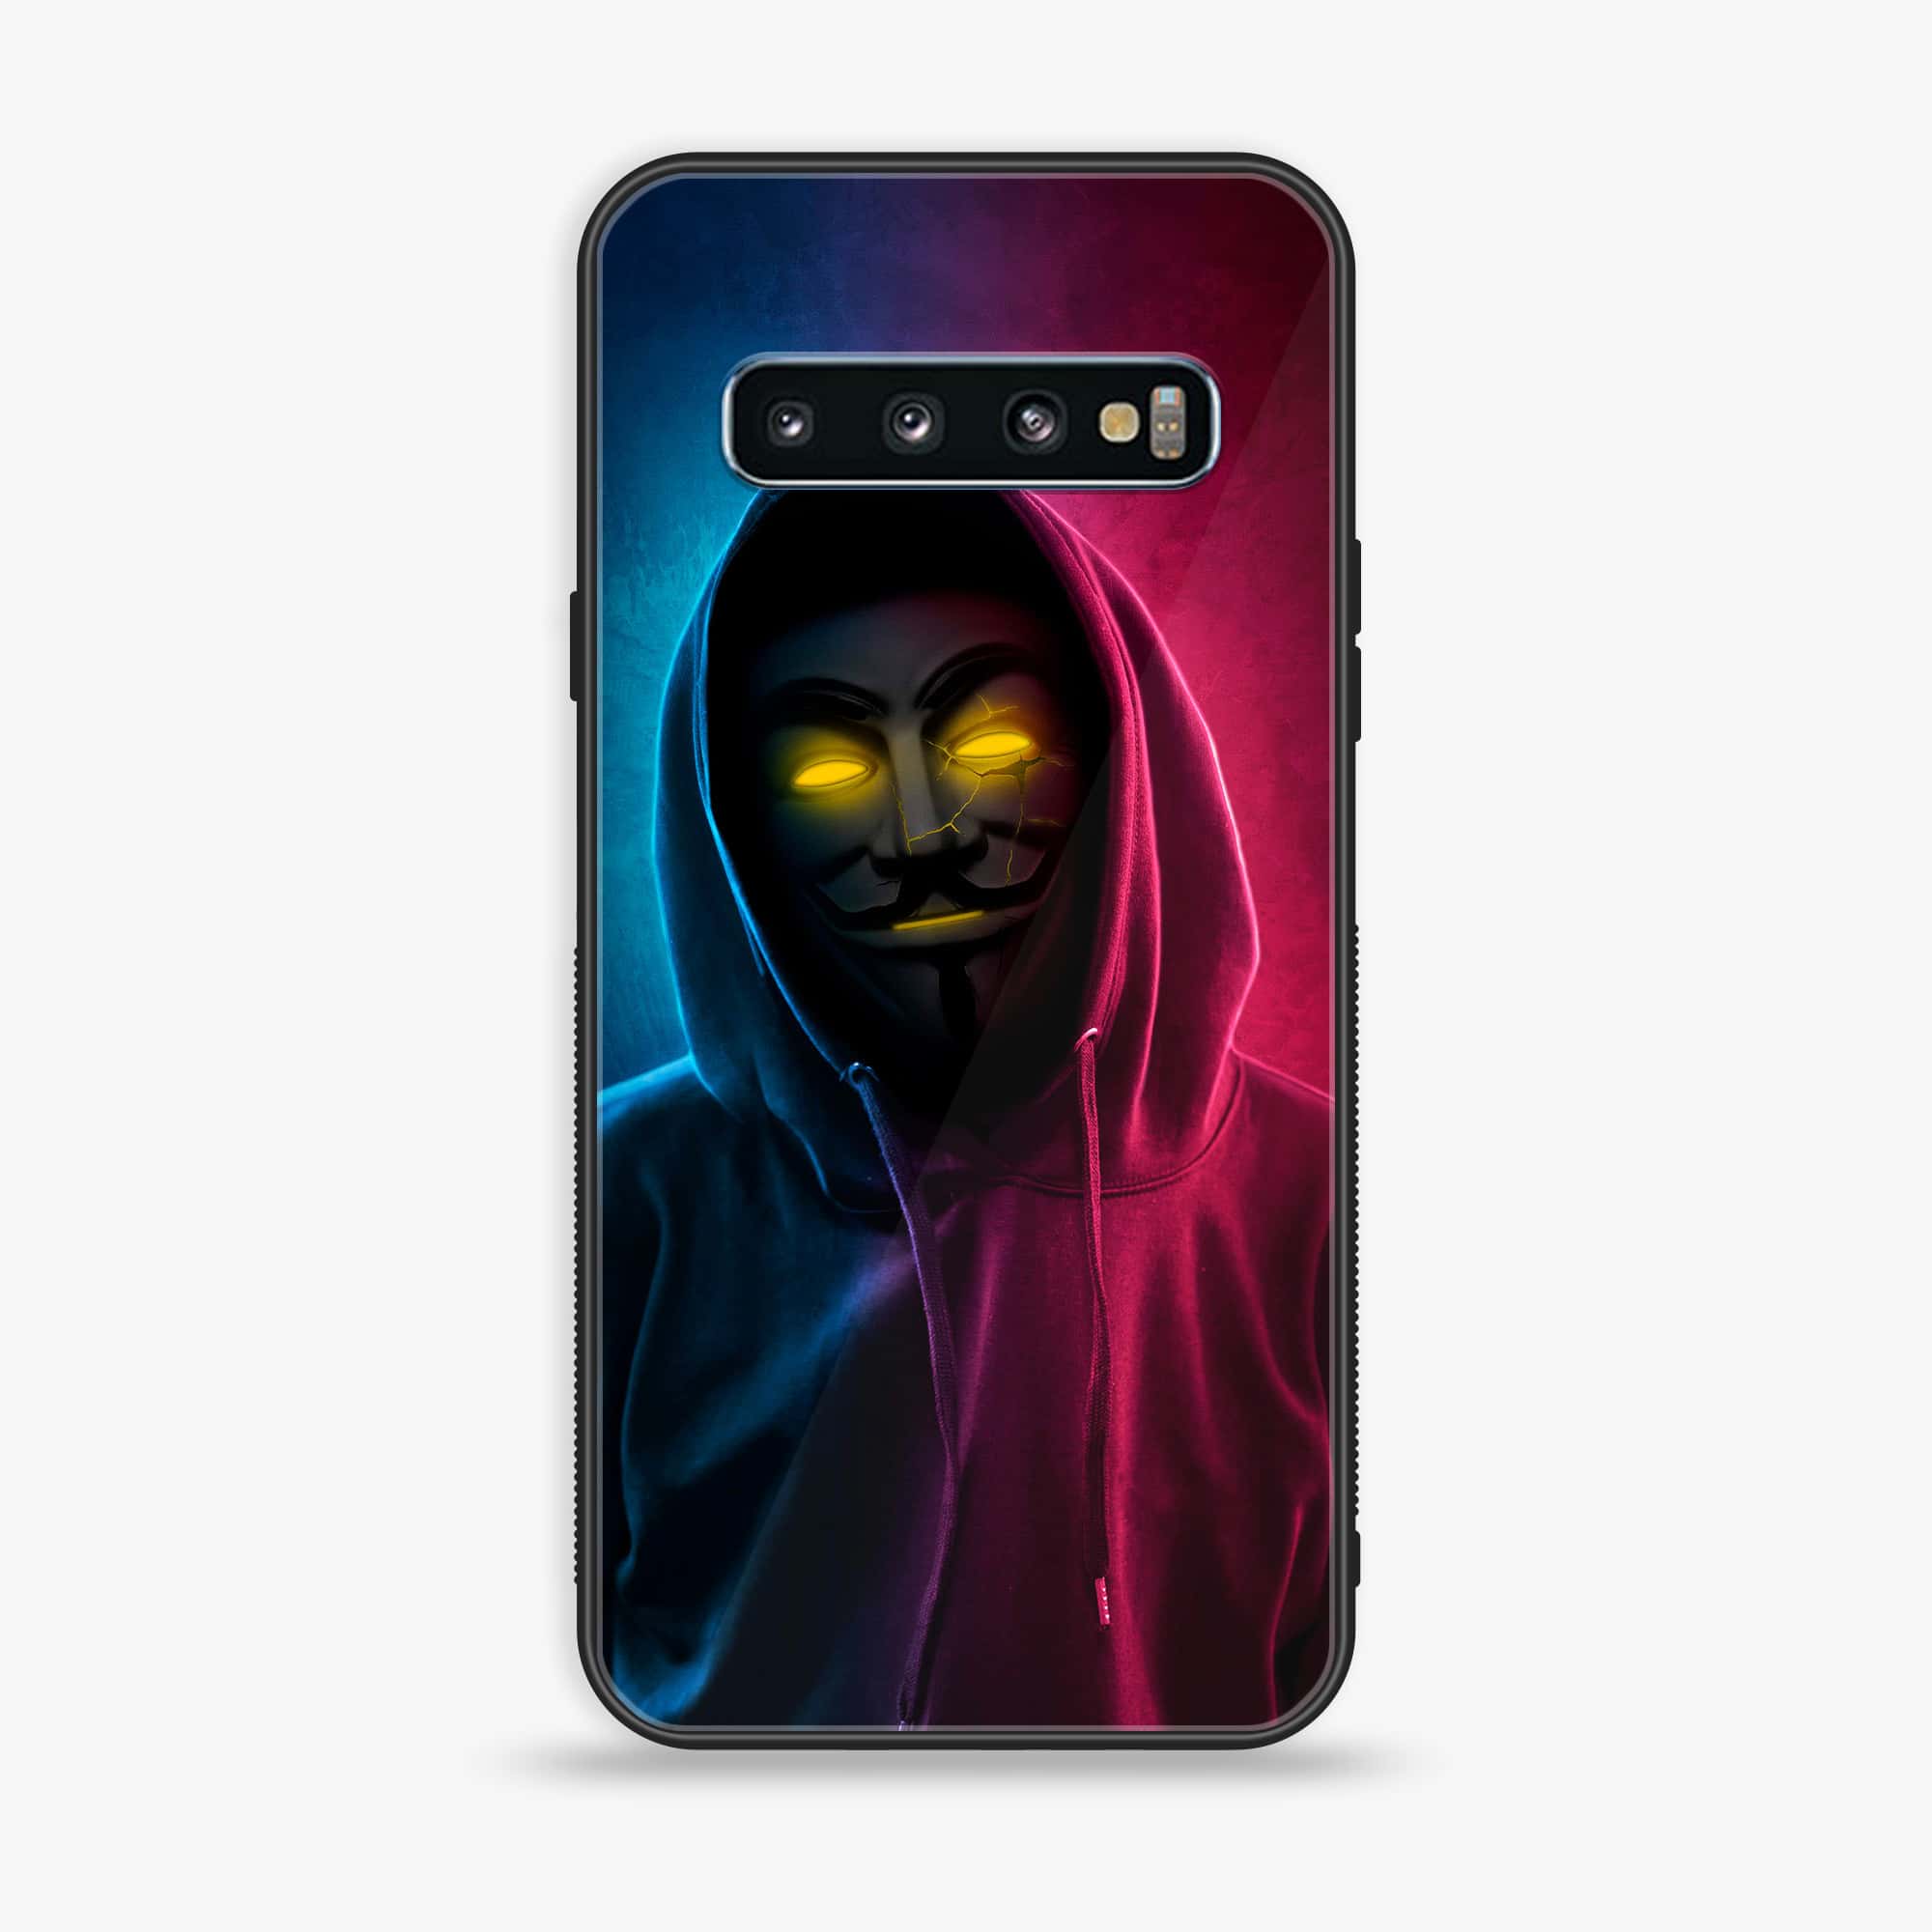 Samsung Galaxy S10 -Anonymous 2.0 Series - Premium Printed Glass soft Bumper shock Proof Case